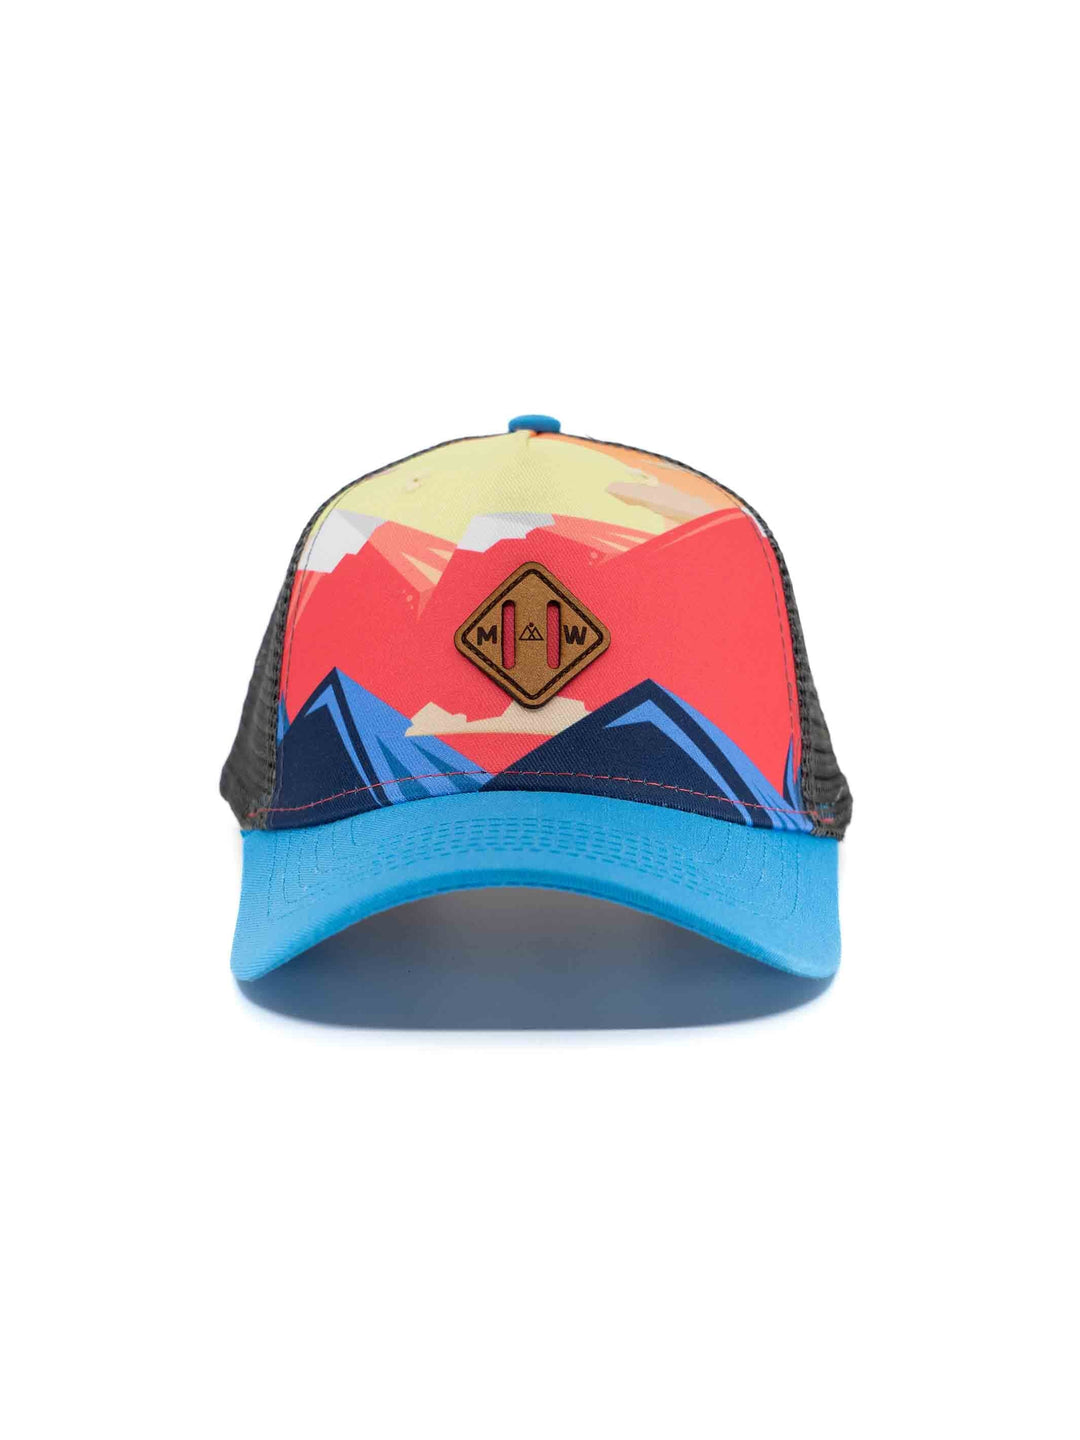 Milk X Whiskey - Youth Sunset Ranges Trucker Hat - Pink and Grey